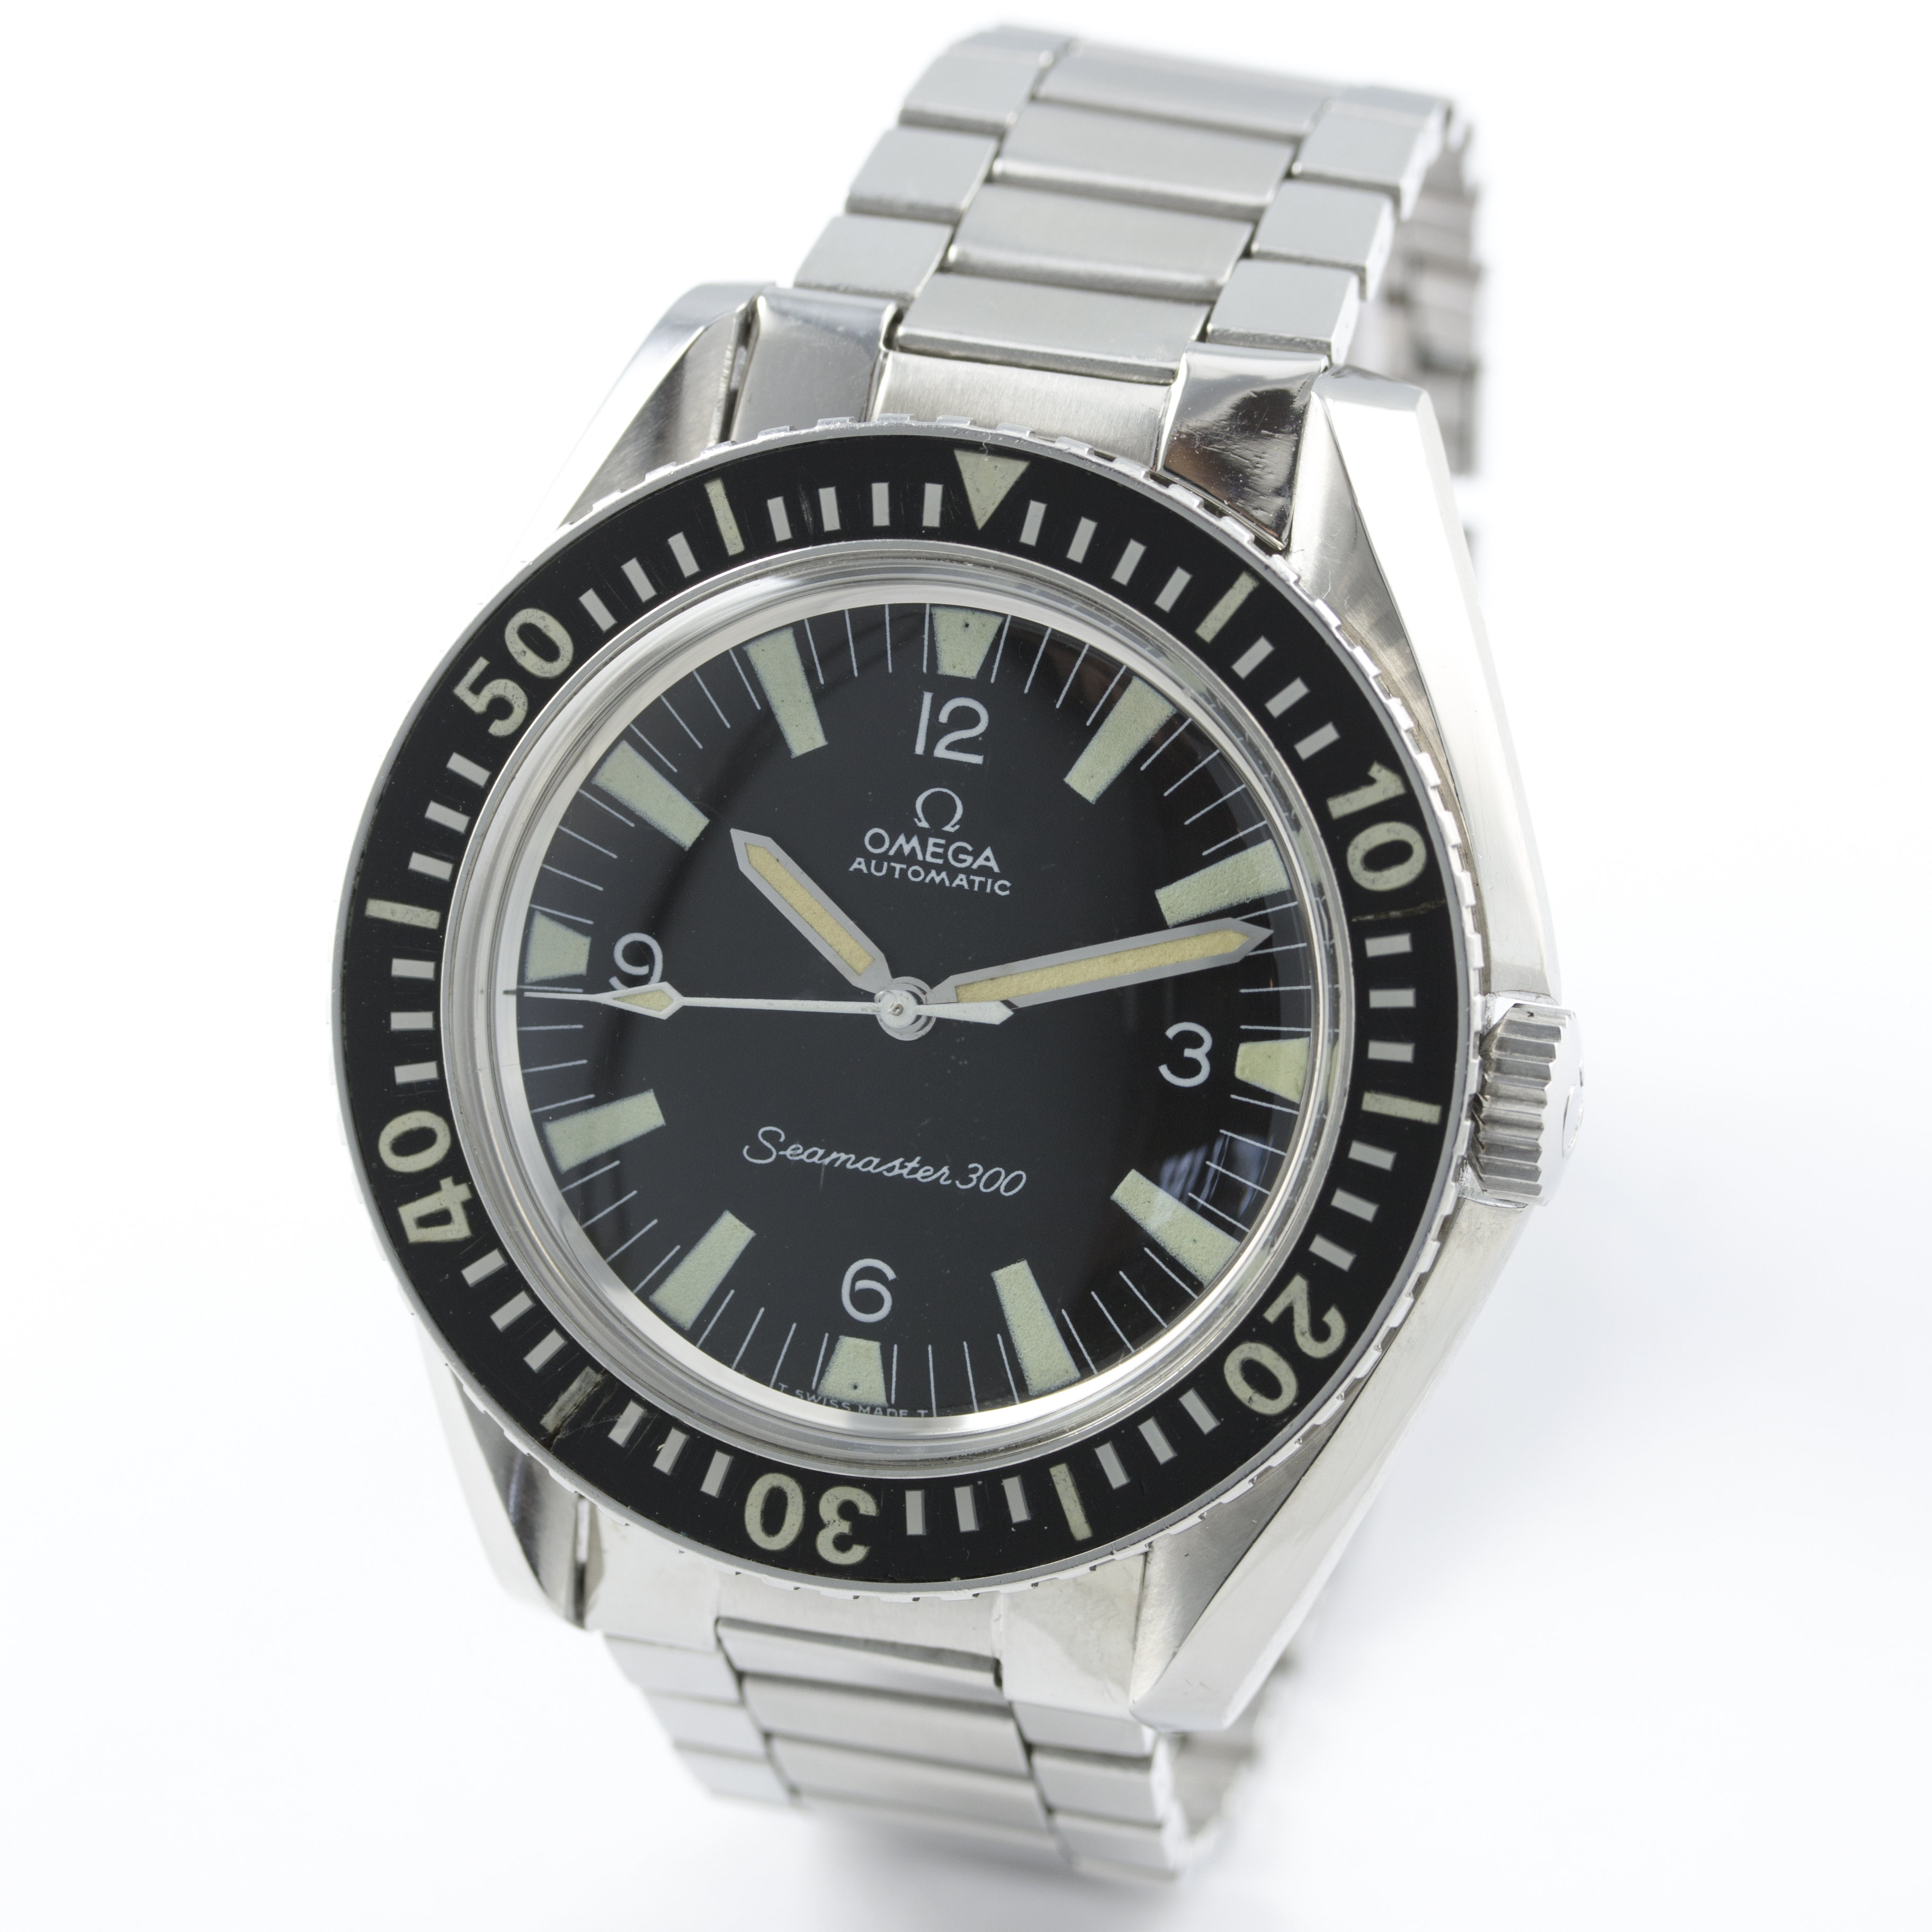 A RARE GENTLEMAN'S STAINLESS STEEL OMEGA SEAMASTER 300 BRACELET WATCH CIRCA 1967, REF. 165.024 D: - Image 3 of 10